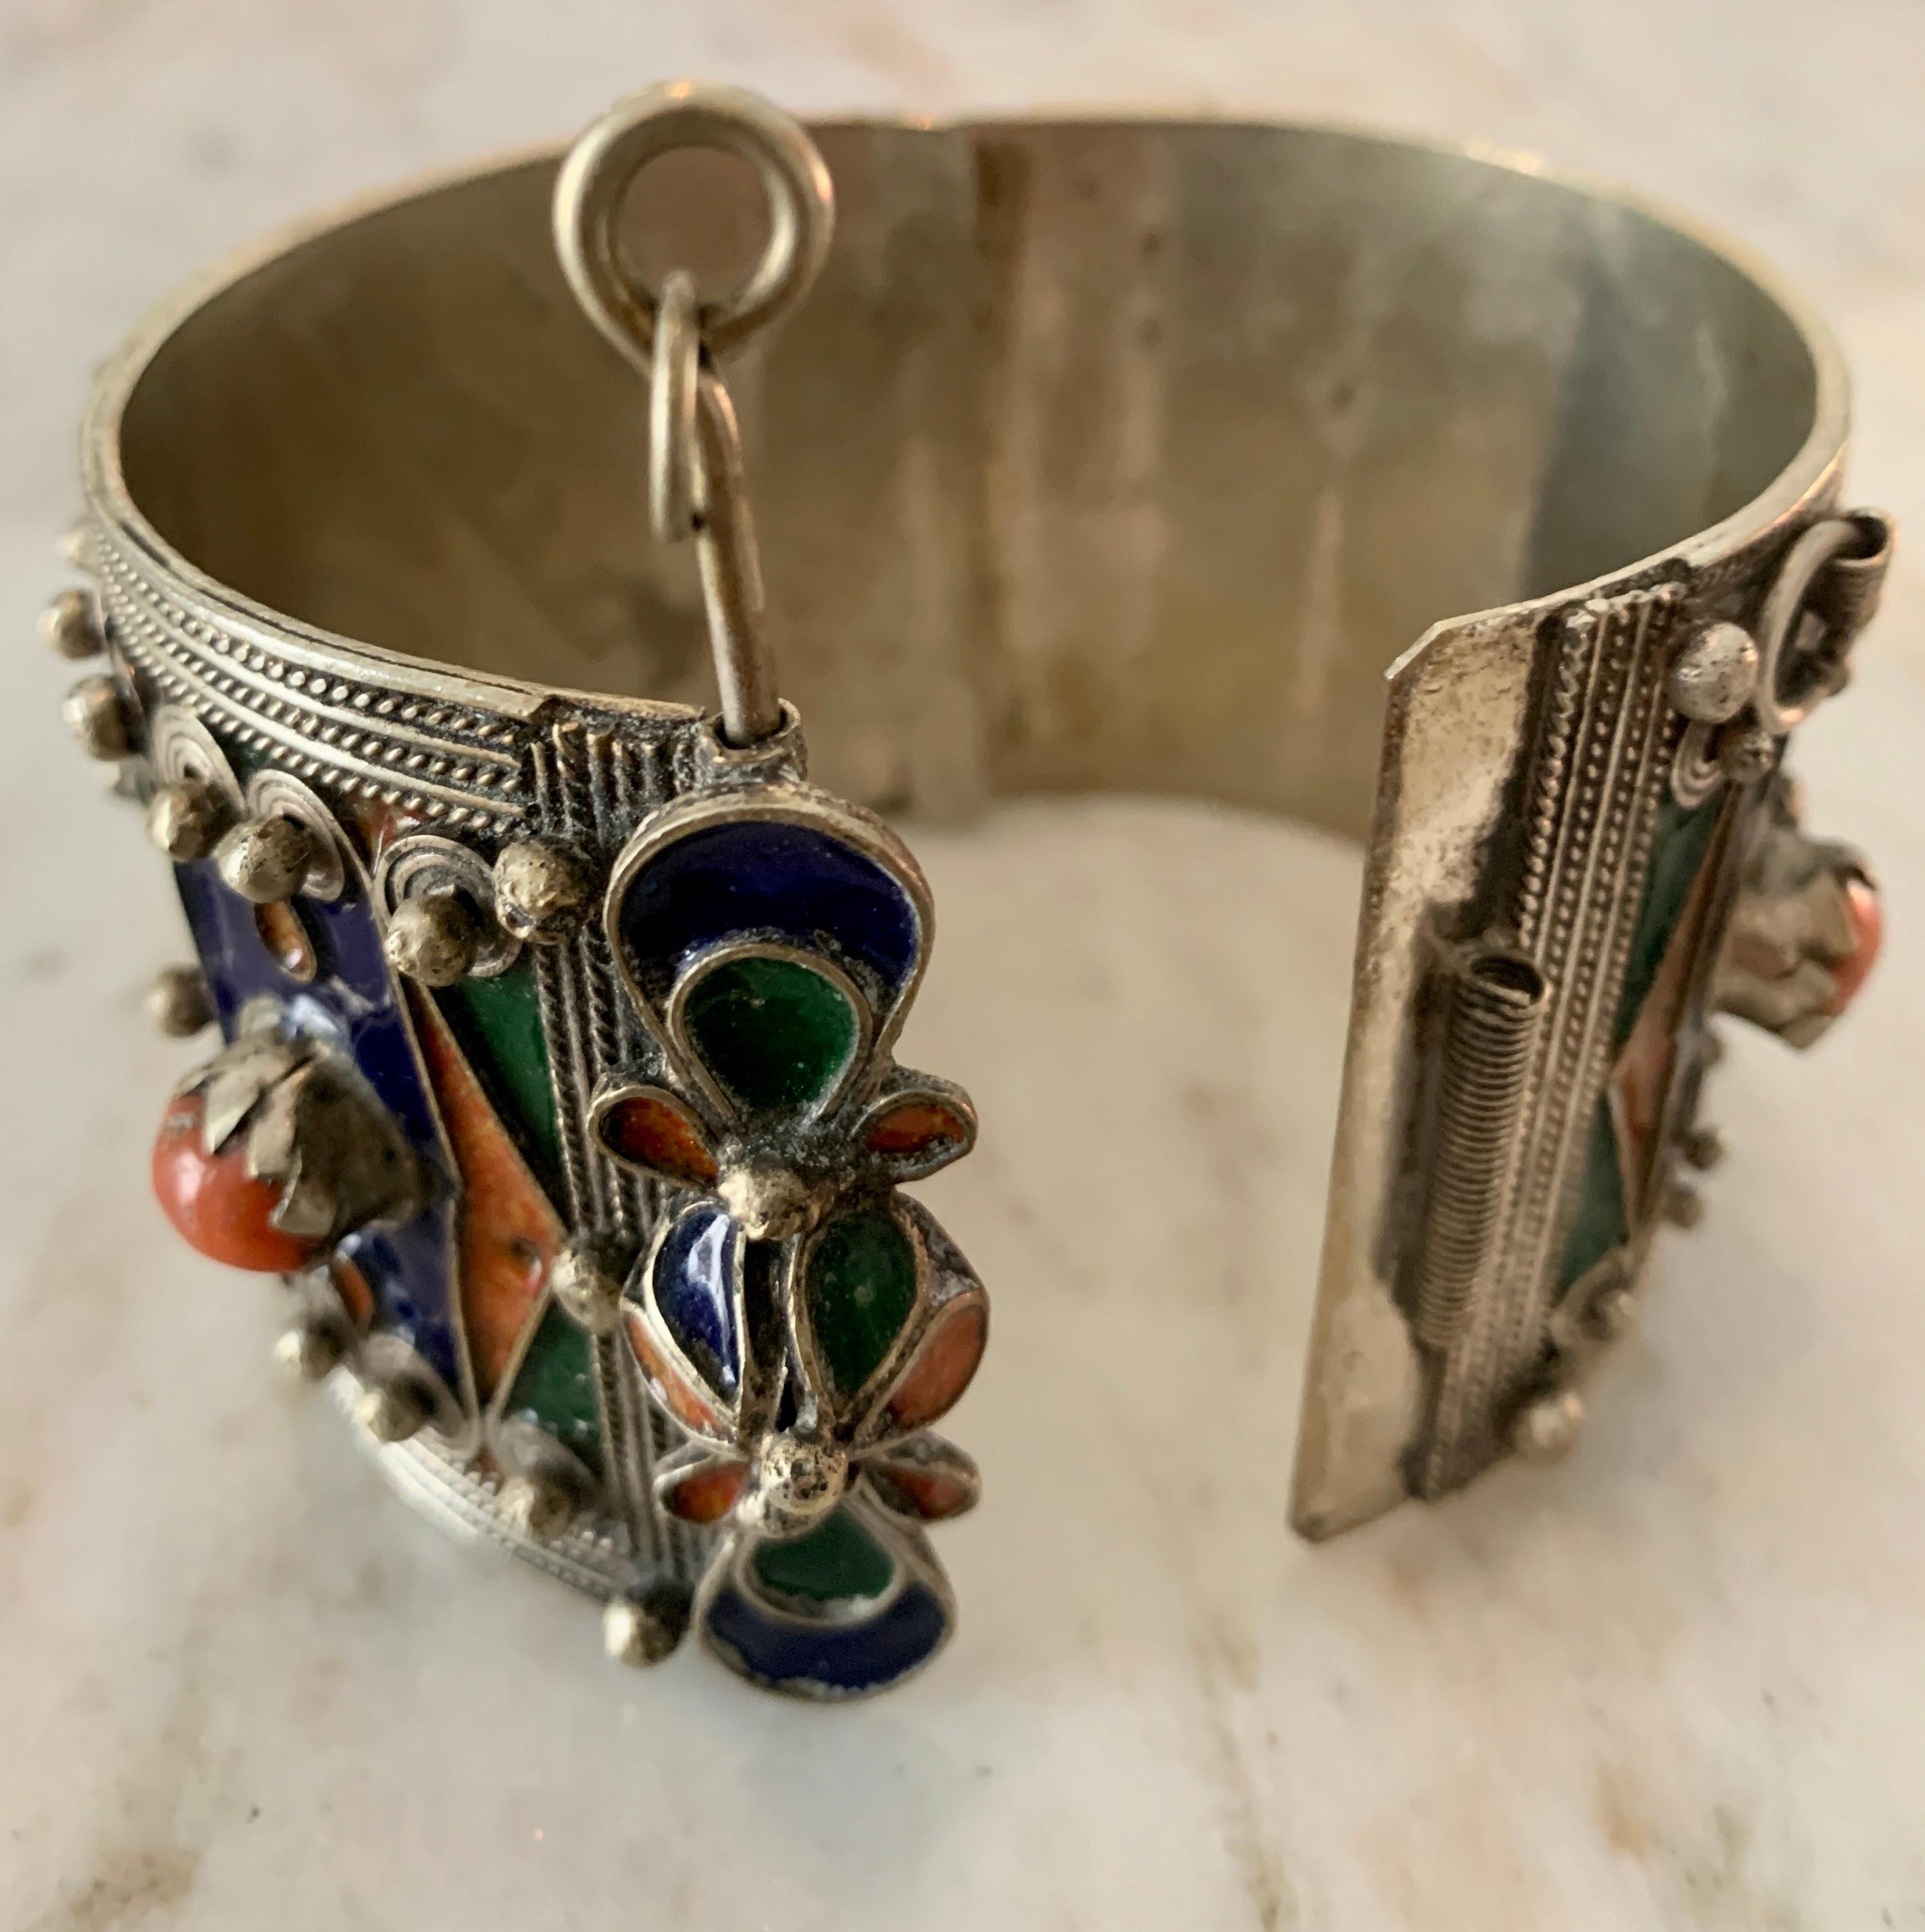 Hand-Crafted Handmade Silver and Enamel Bracelet Cuff For Sale